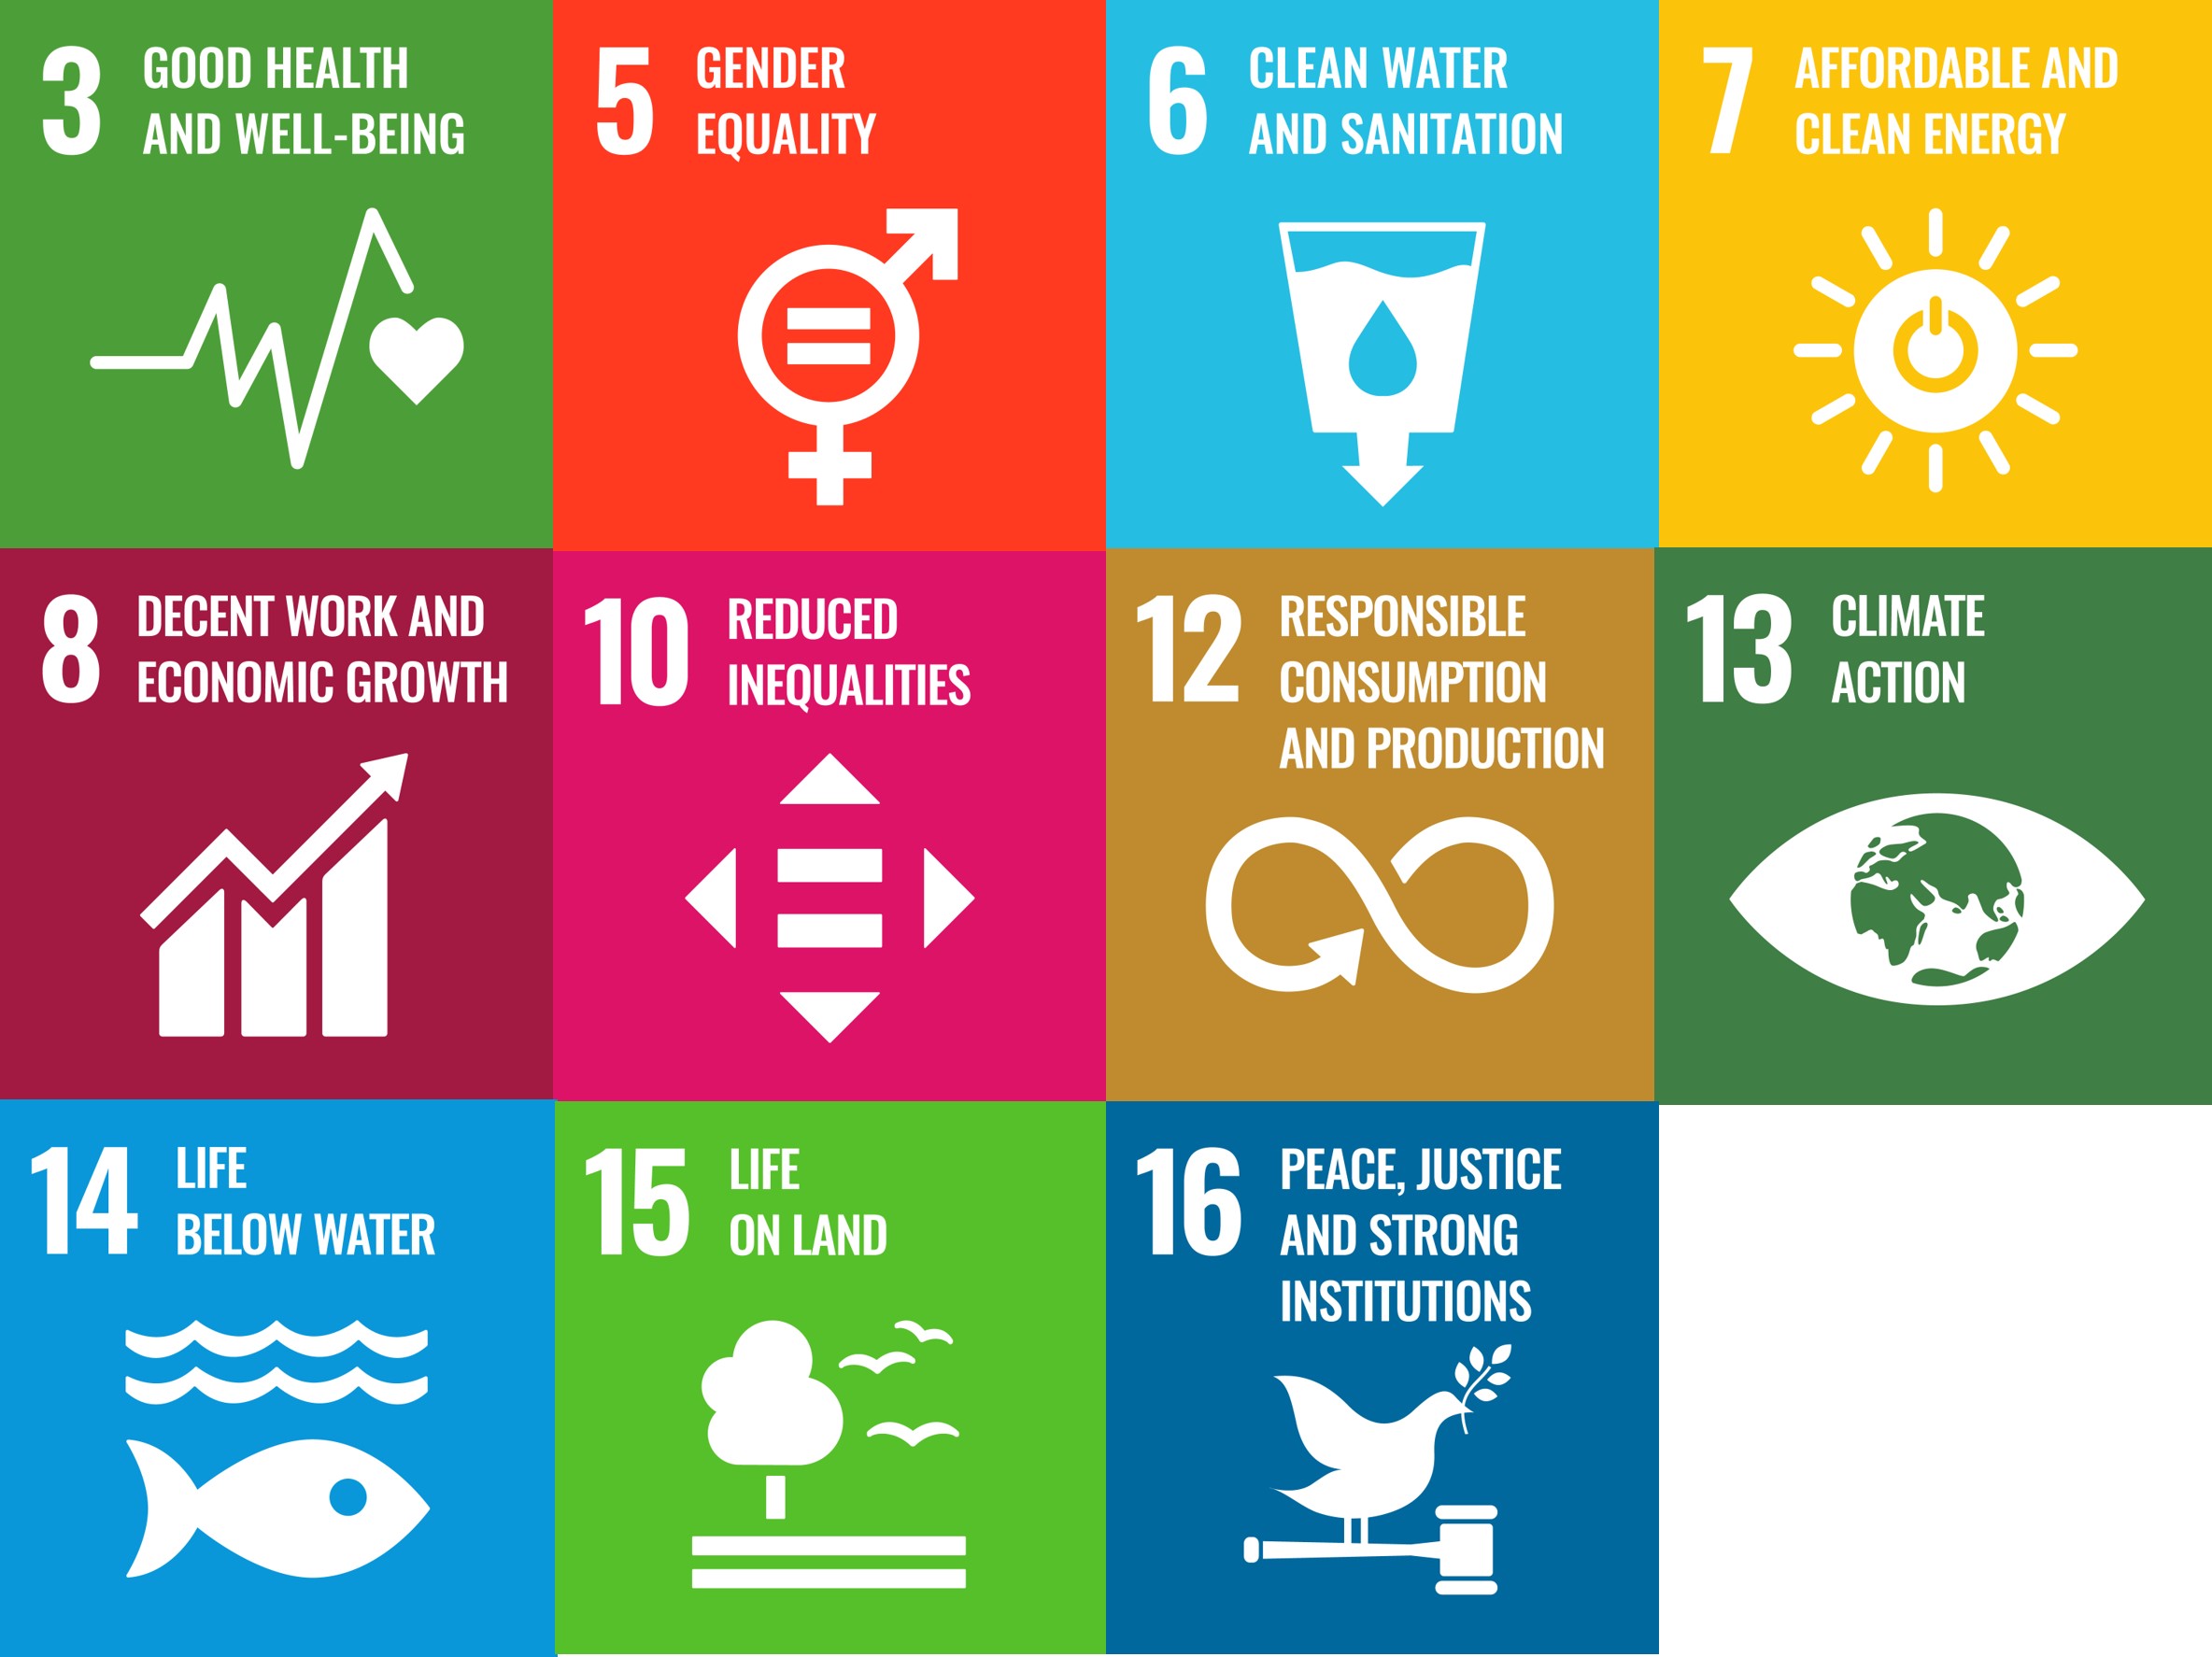 Sustainable Development Goals associated with the textile value chain, as identified by UNEP. 